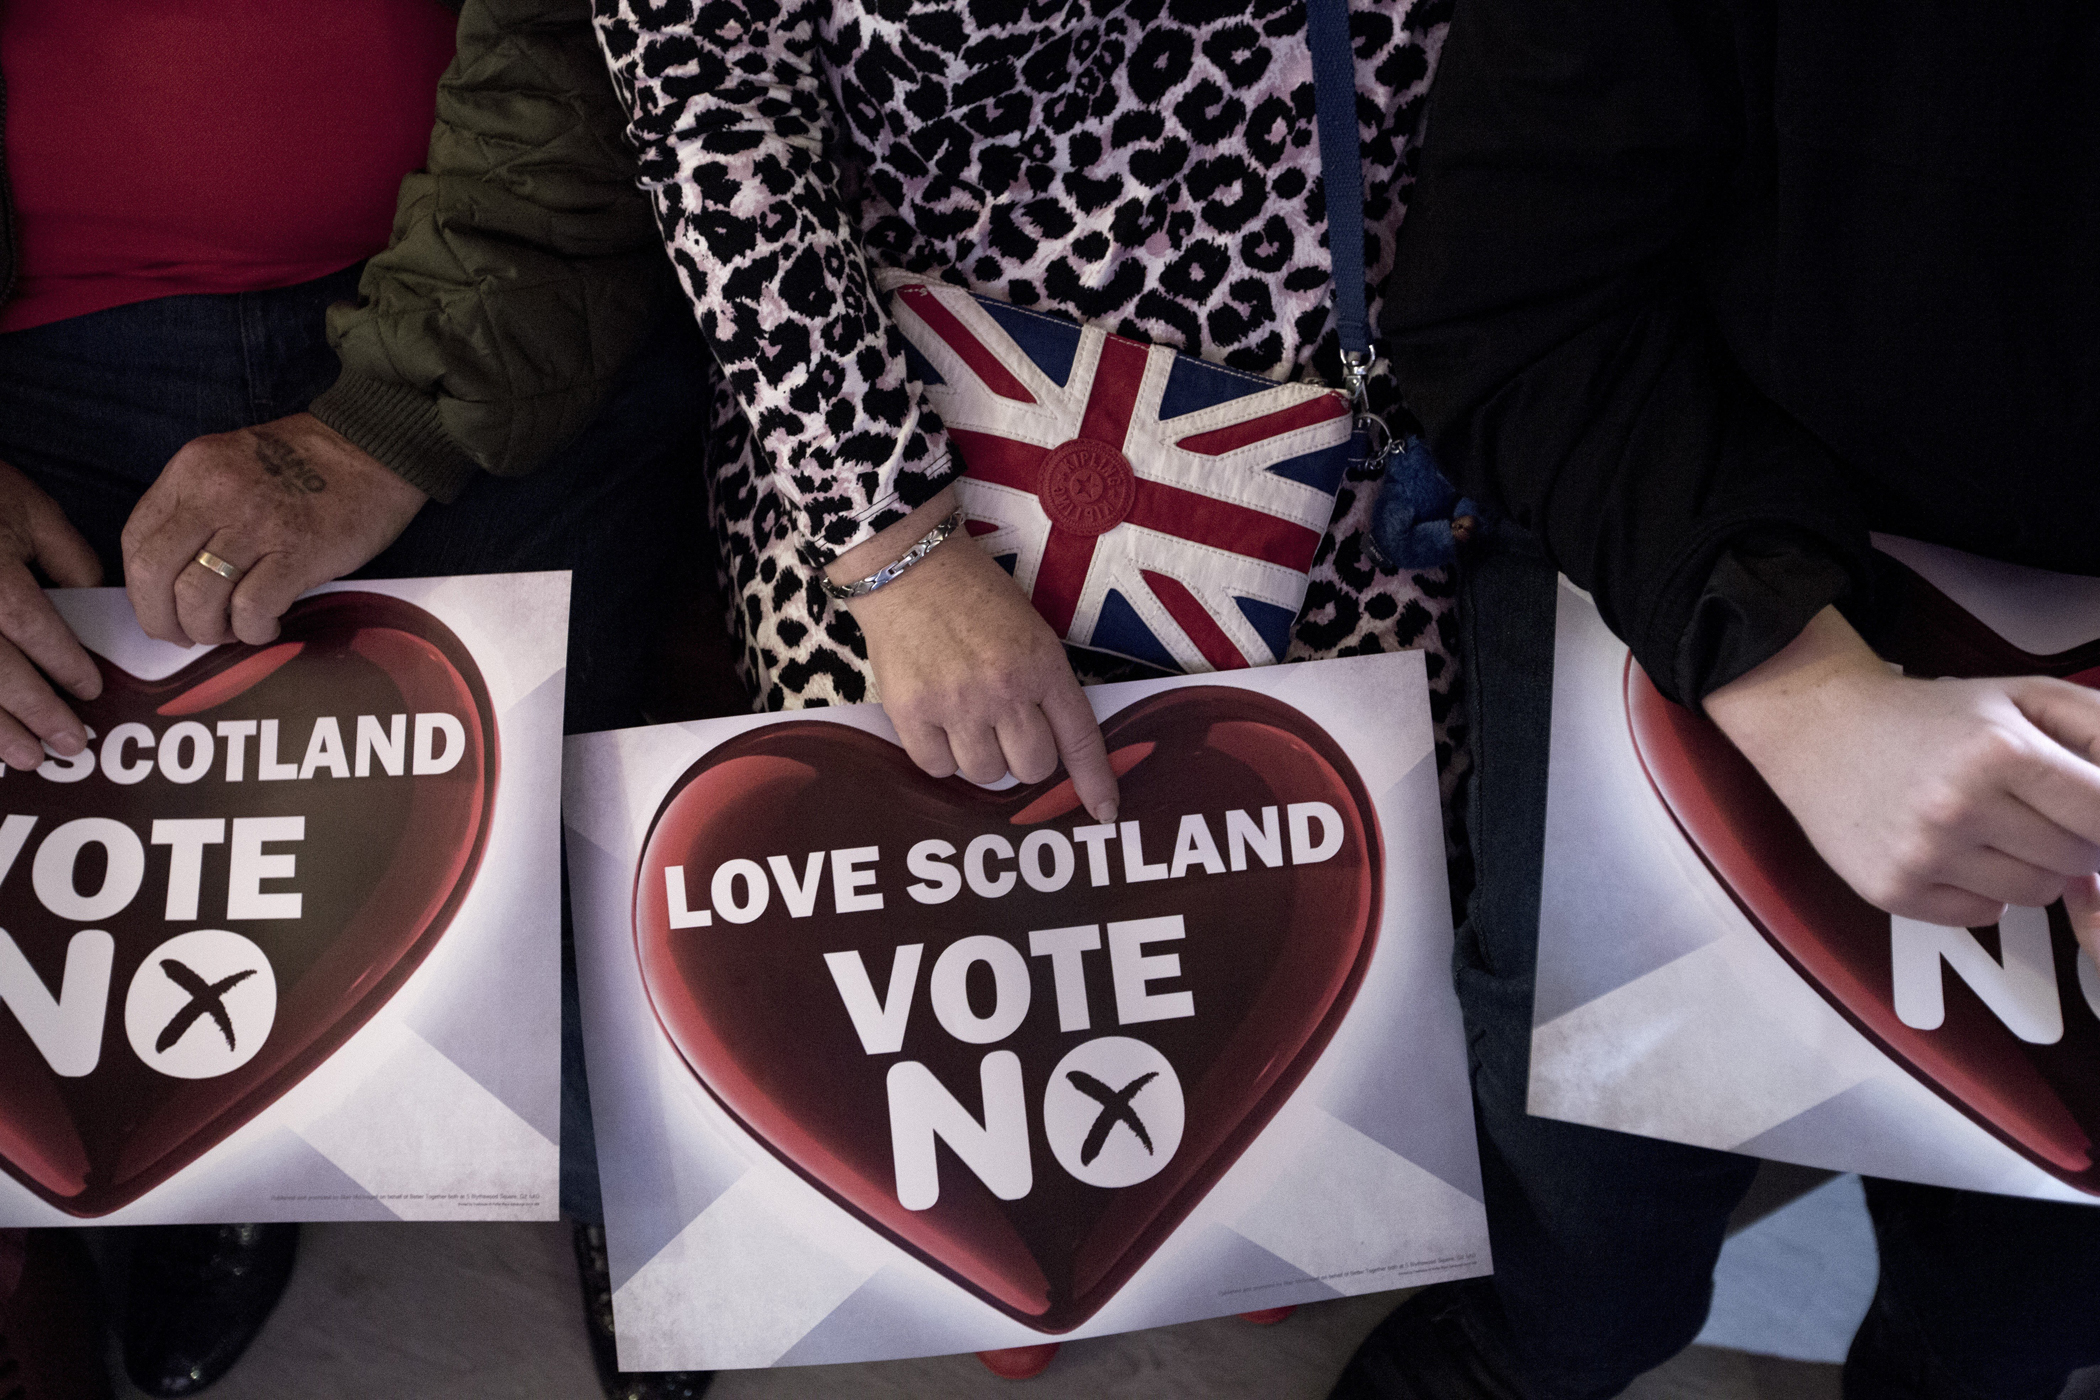 A woman with a 'Vote No' sign and a bag bearing a British flag, at an anti-Scottish independence Better Together rally at Community Central Hall, Glasgow, Sept. 17, 2014.